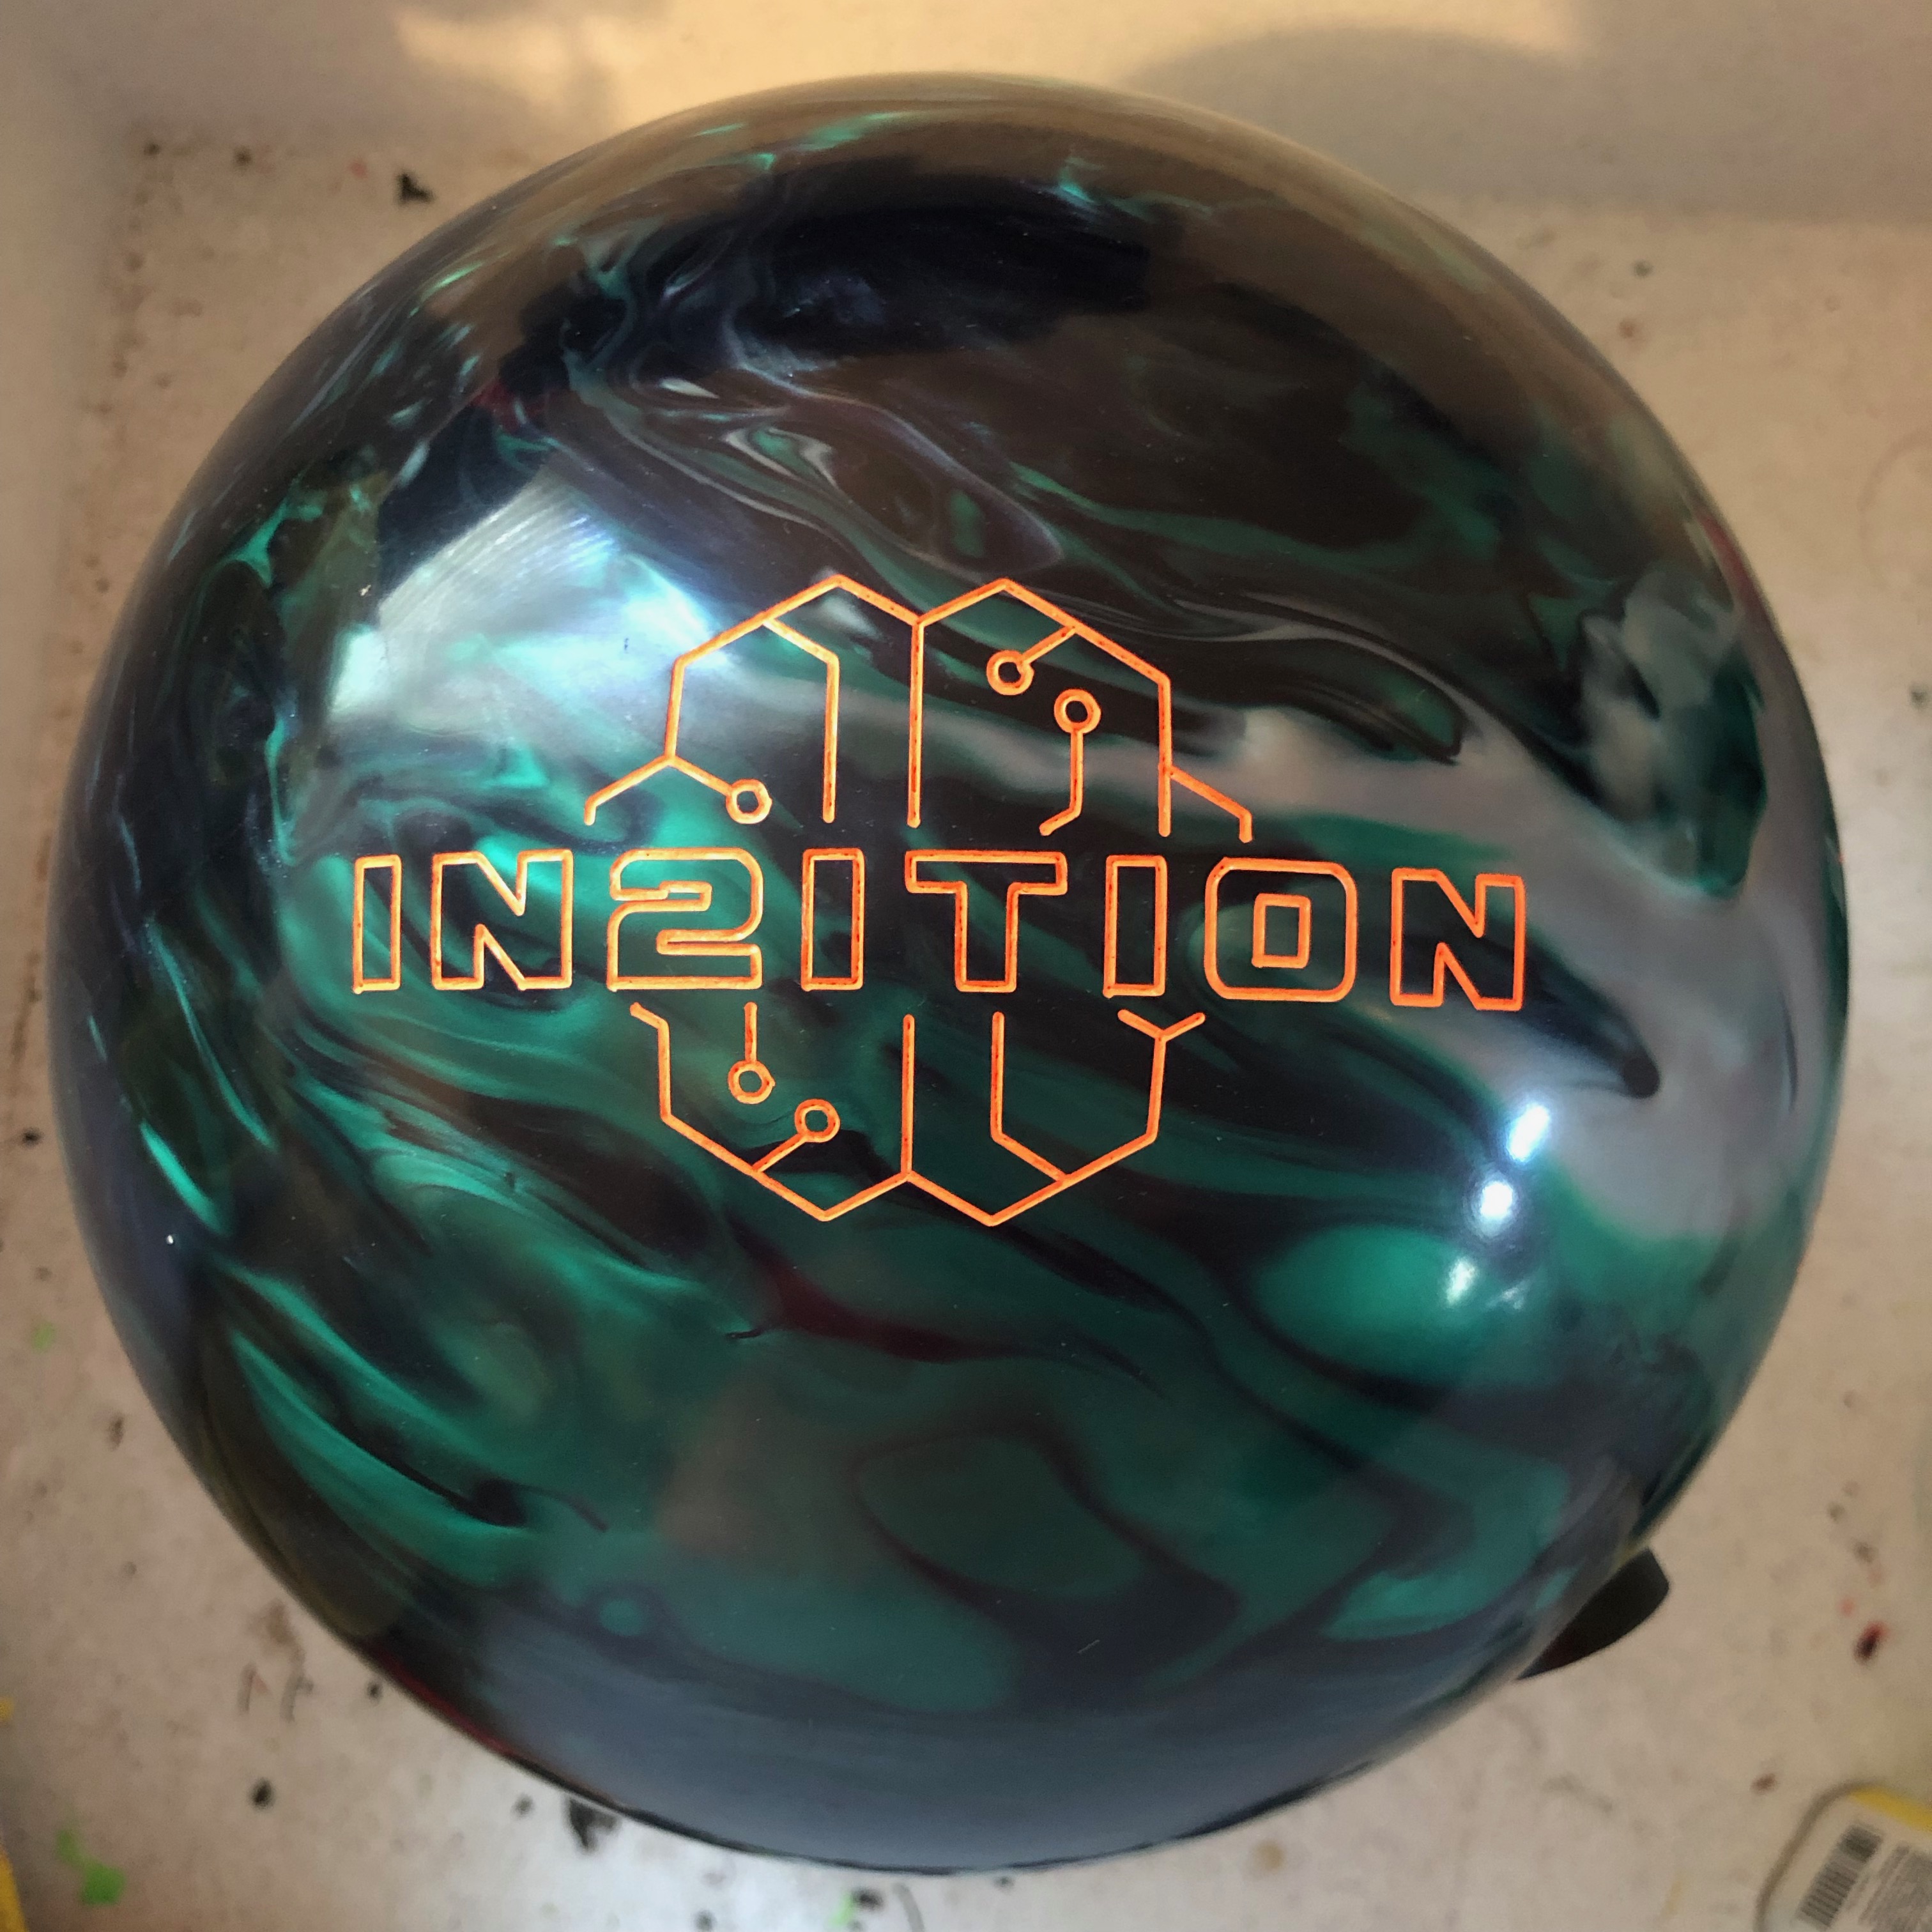 Track In2ition 1st Quality Bowling Ball NIB15 Pounds 